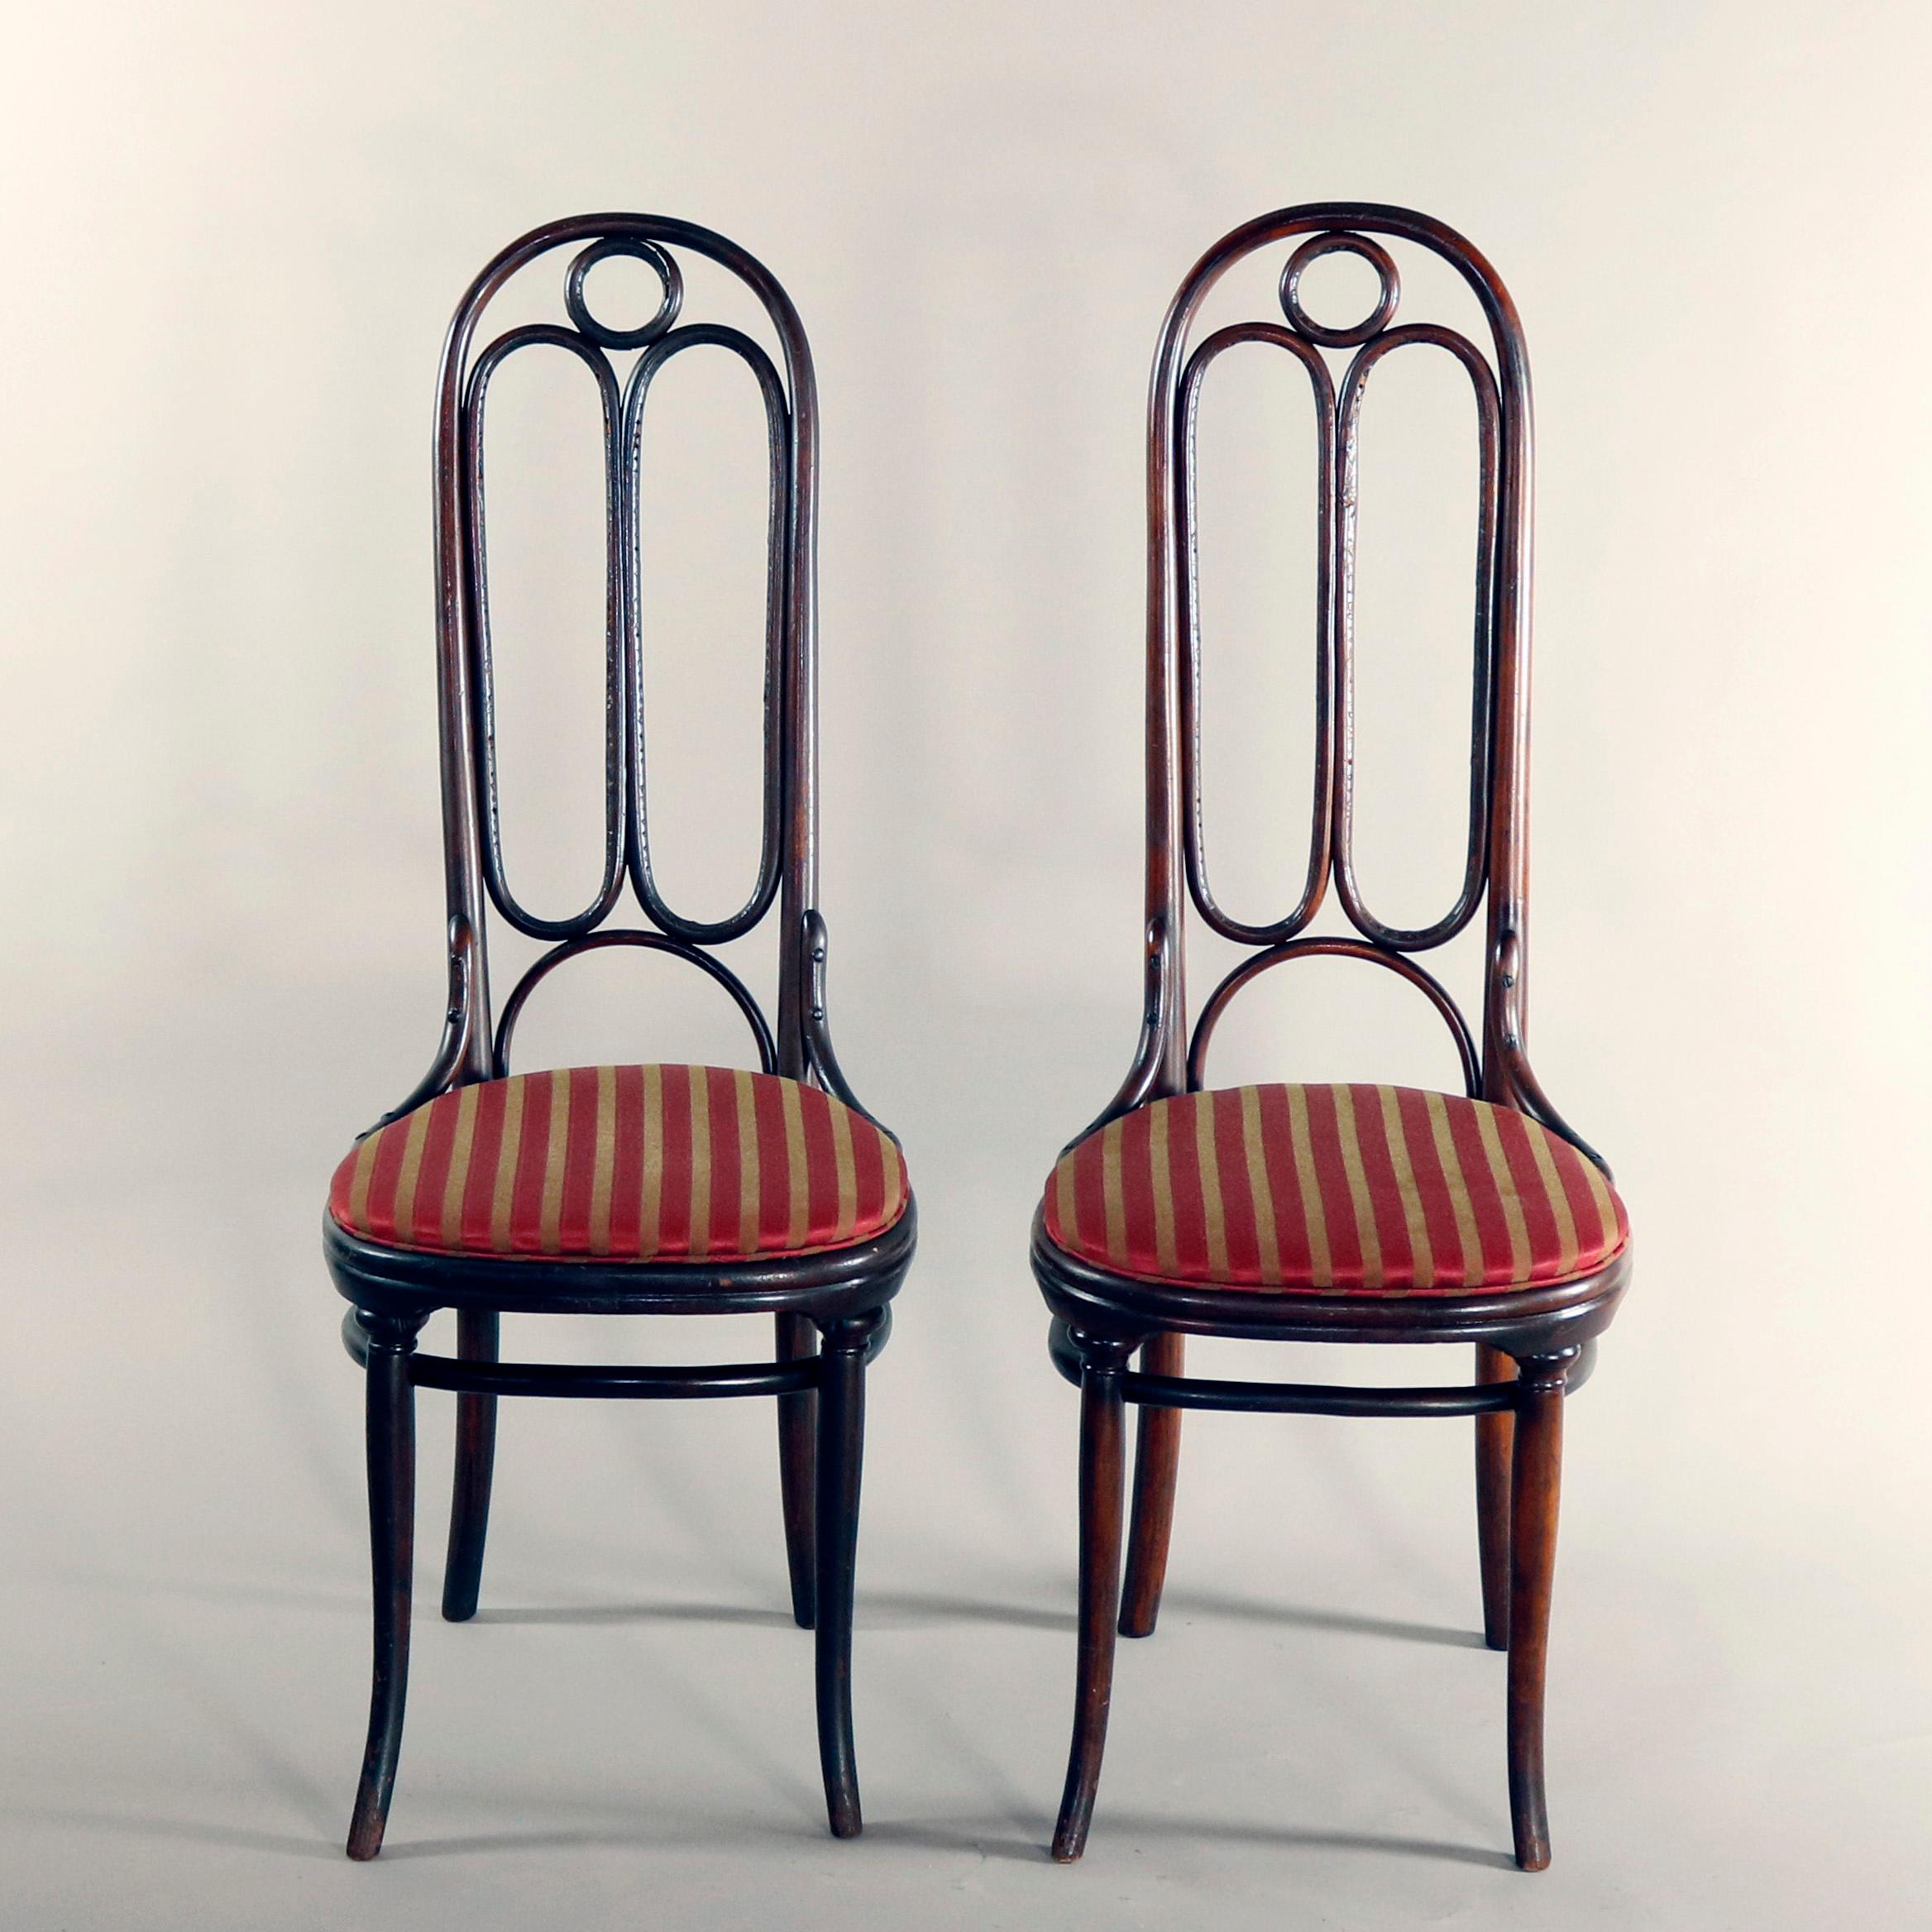 A pair of German antique chairs by Michael Thonet offer tall back bentwood frame chairs offer tall backs and upholstered seats, signed Thonet, circa 1900

Measures: 46.25